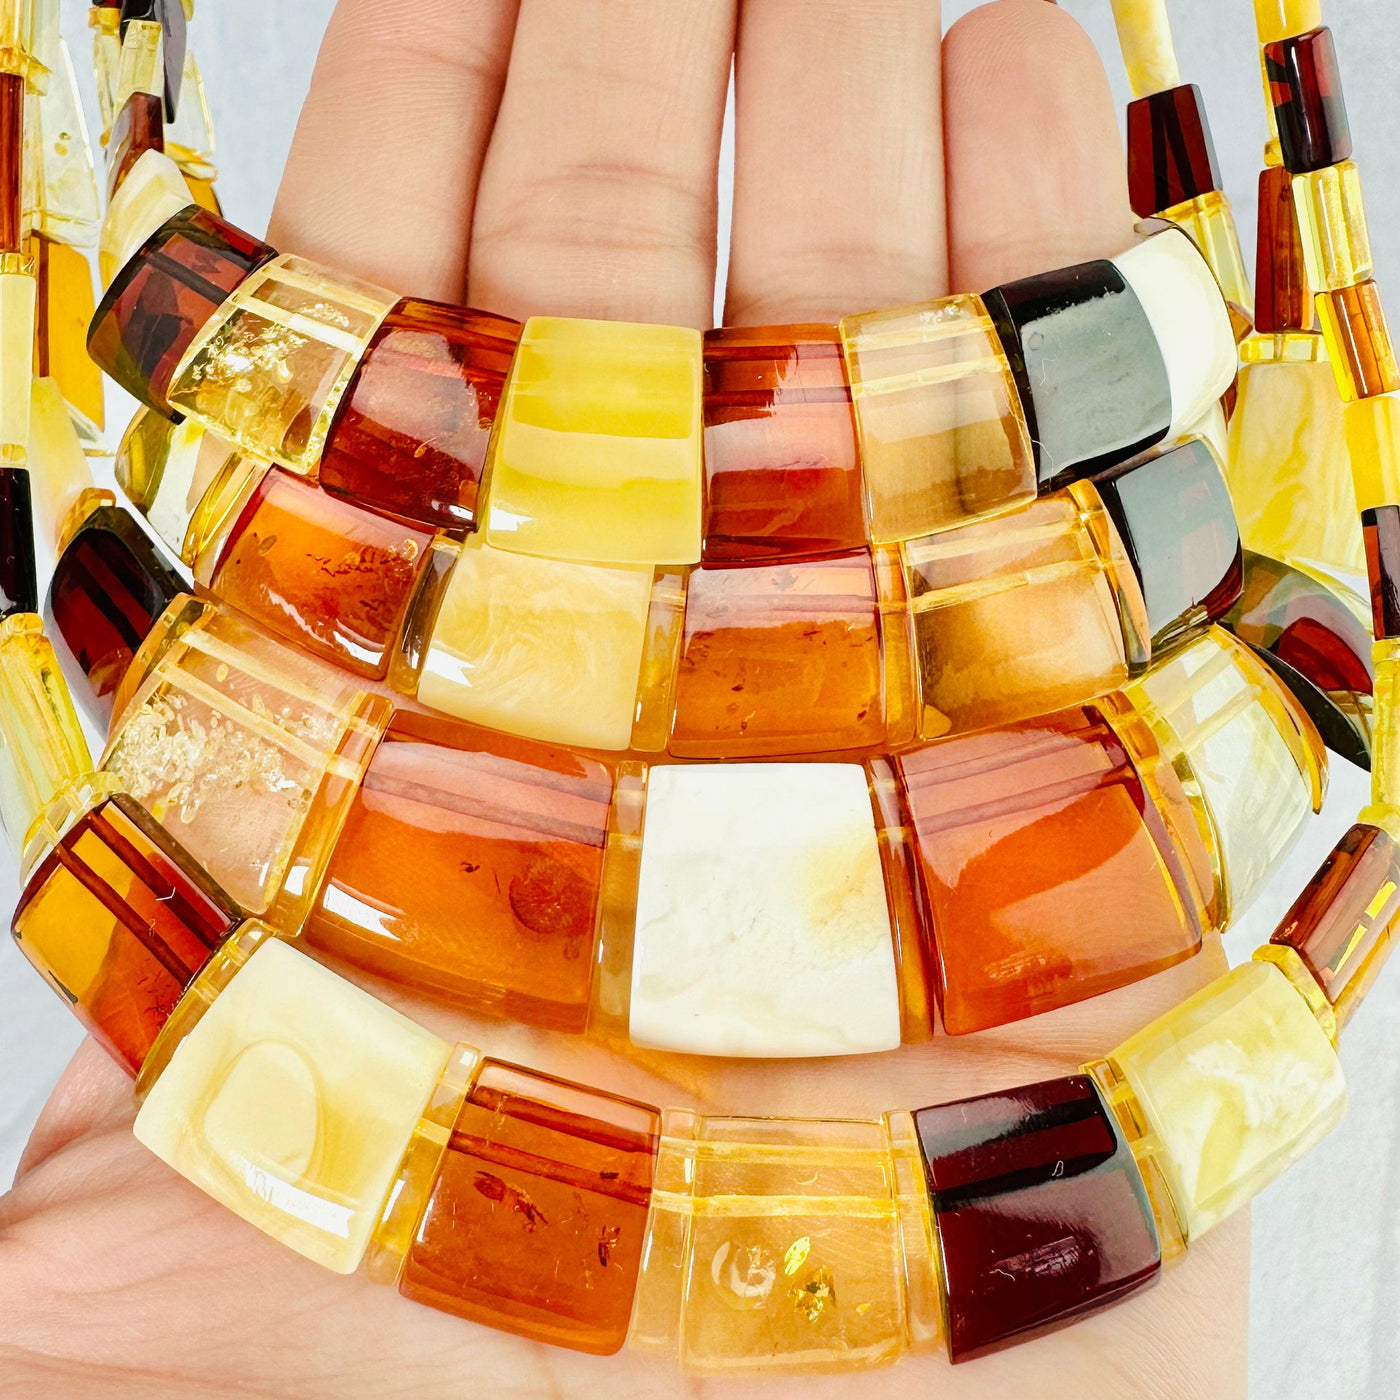 Baltic Amber Cleopatra Necklace - You Choose